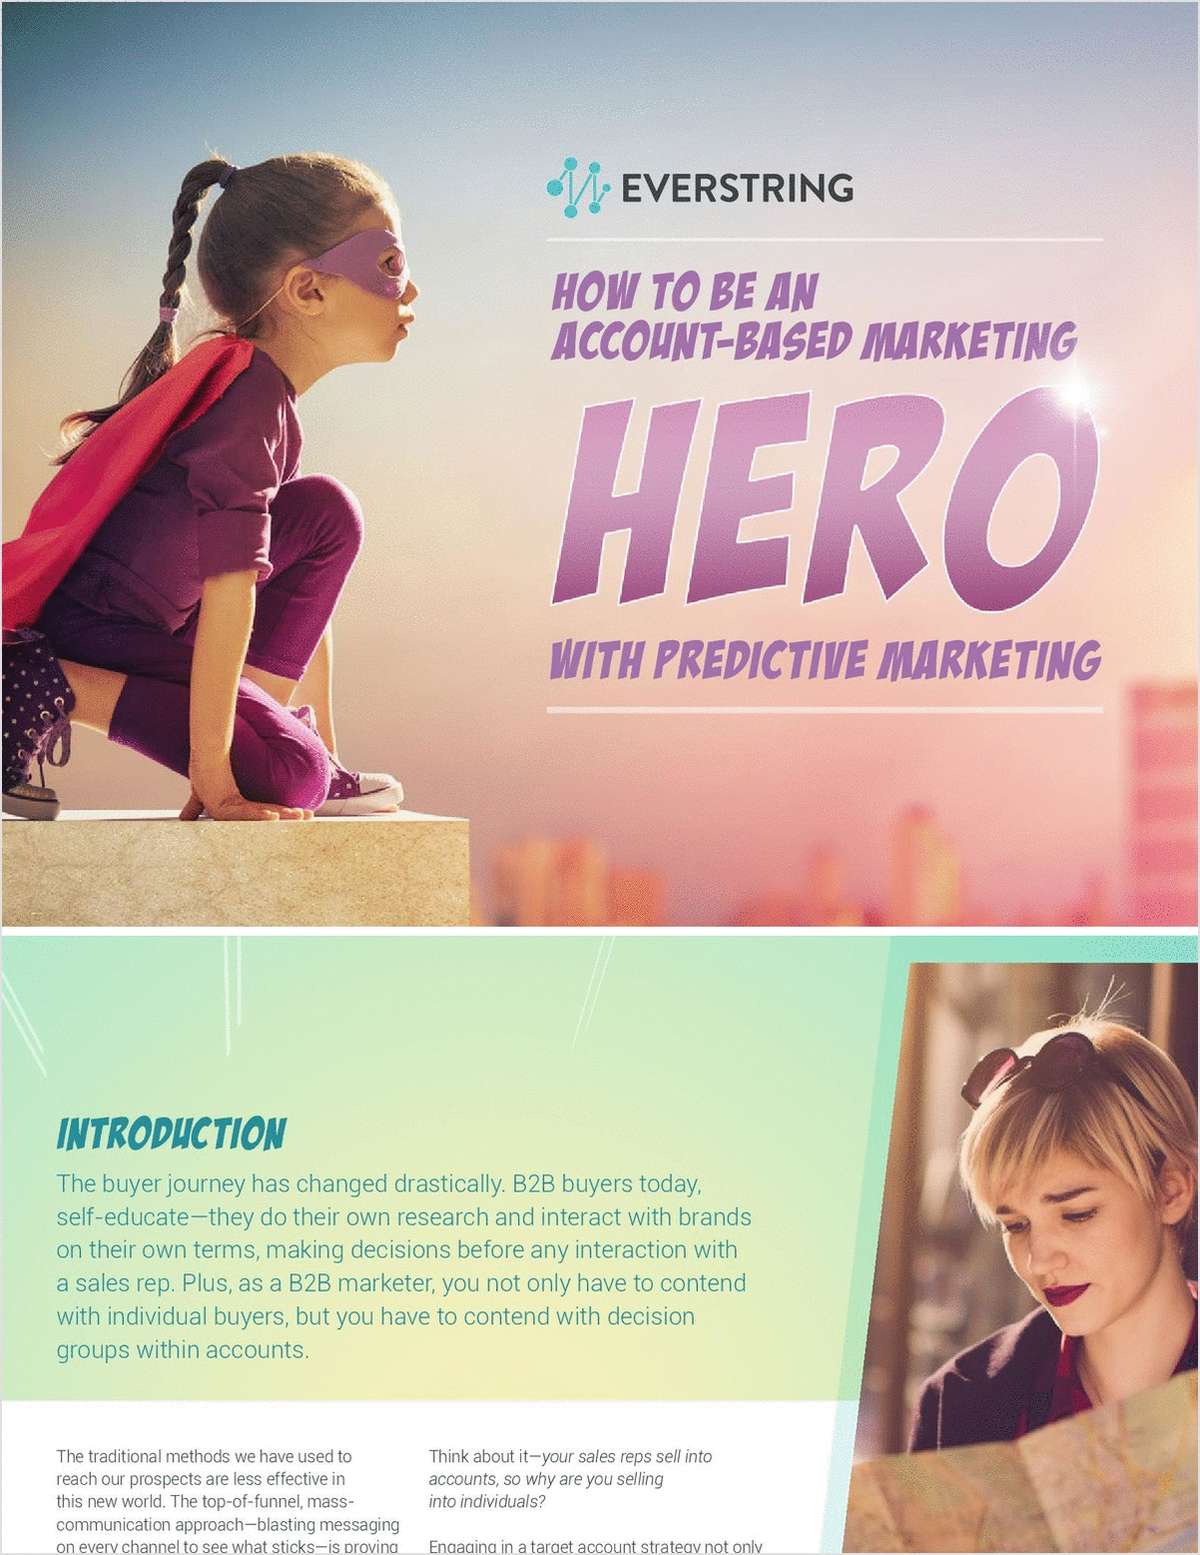 How To Be an Account-Based Marketing Hero with Predictive Marketing